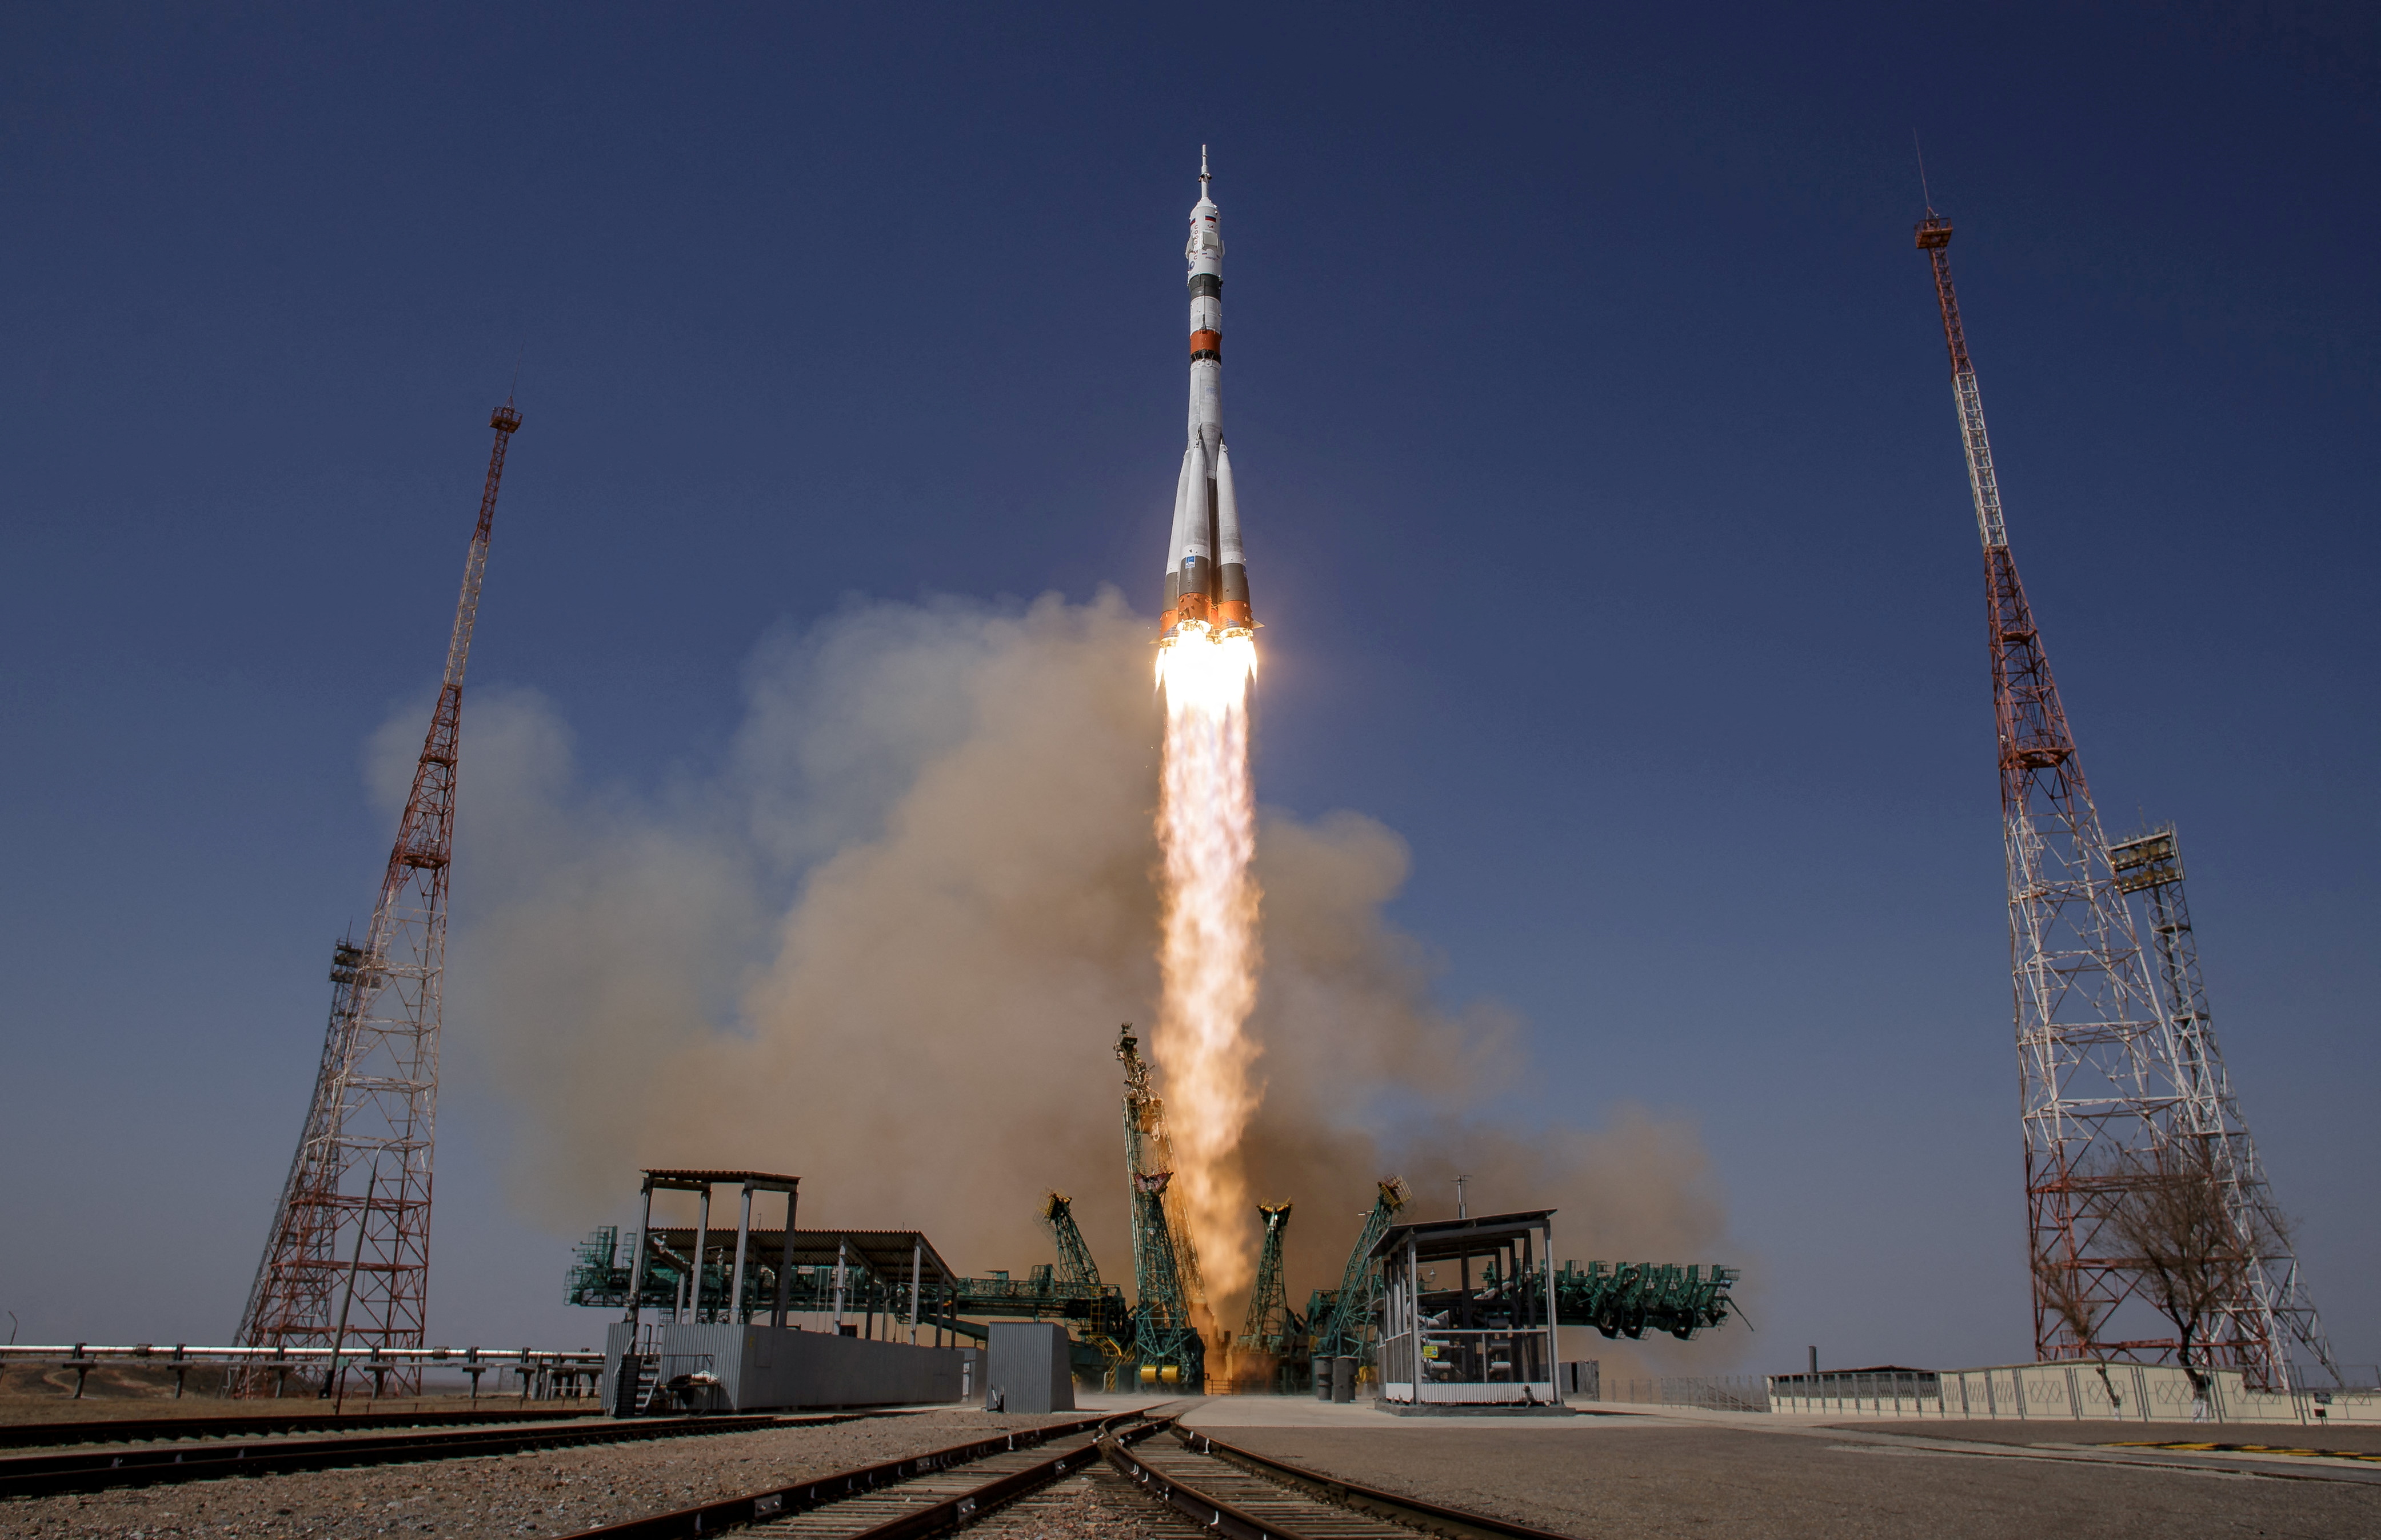 Soyuz MS-18 spacecraft carrying ISS crew blasts off from the launchpad at the Baikonur Cosmodrome